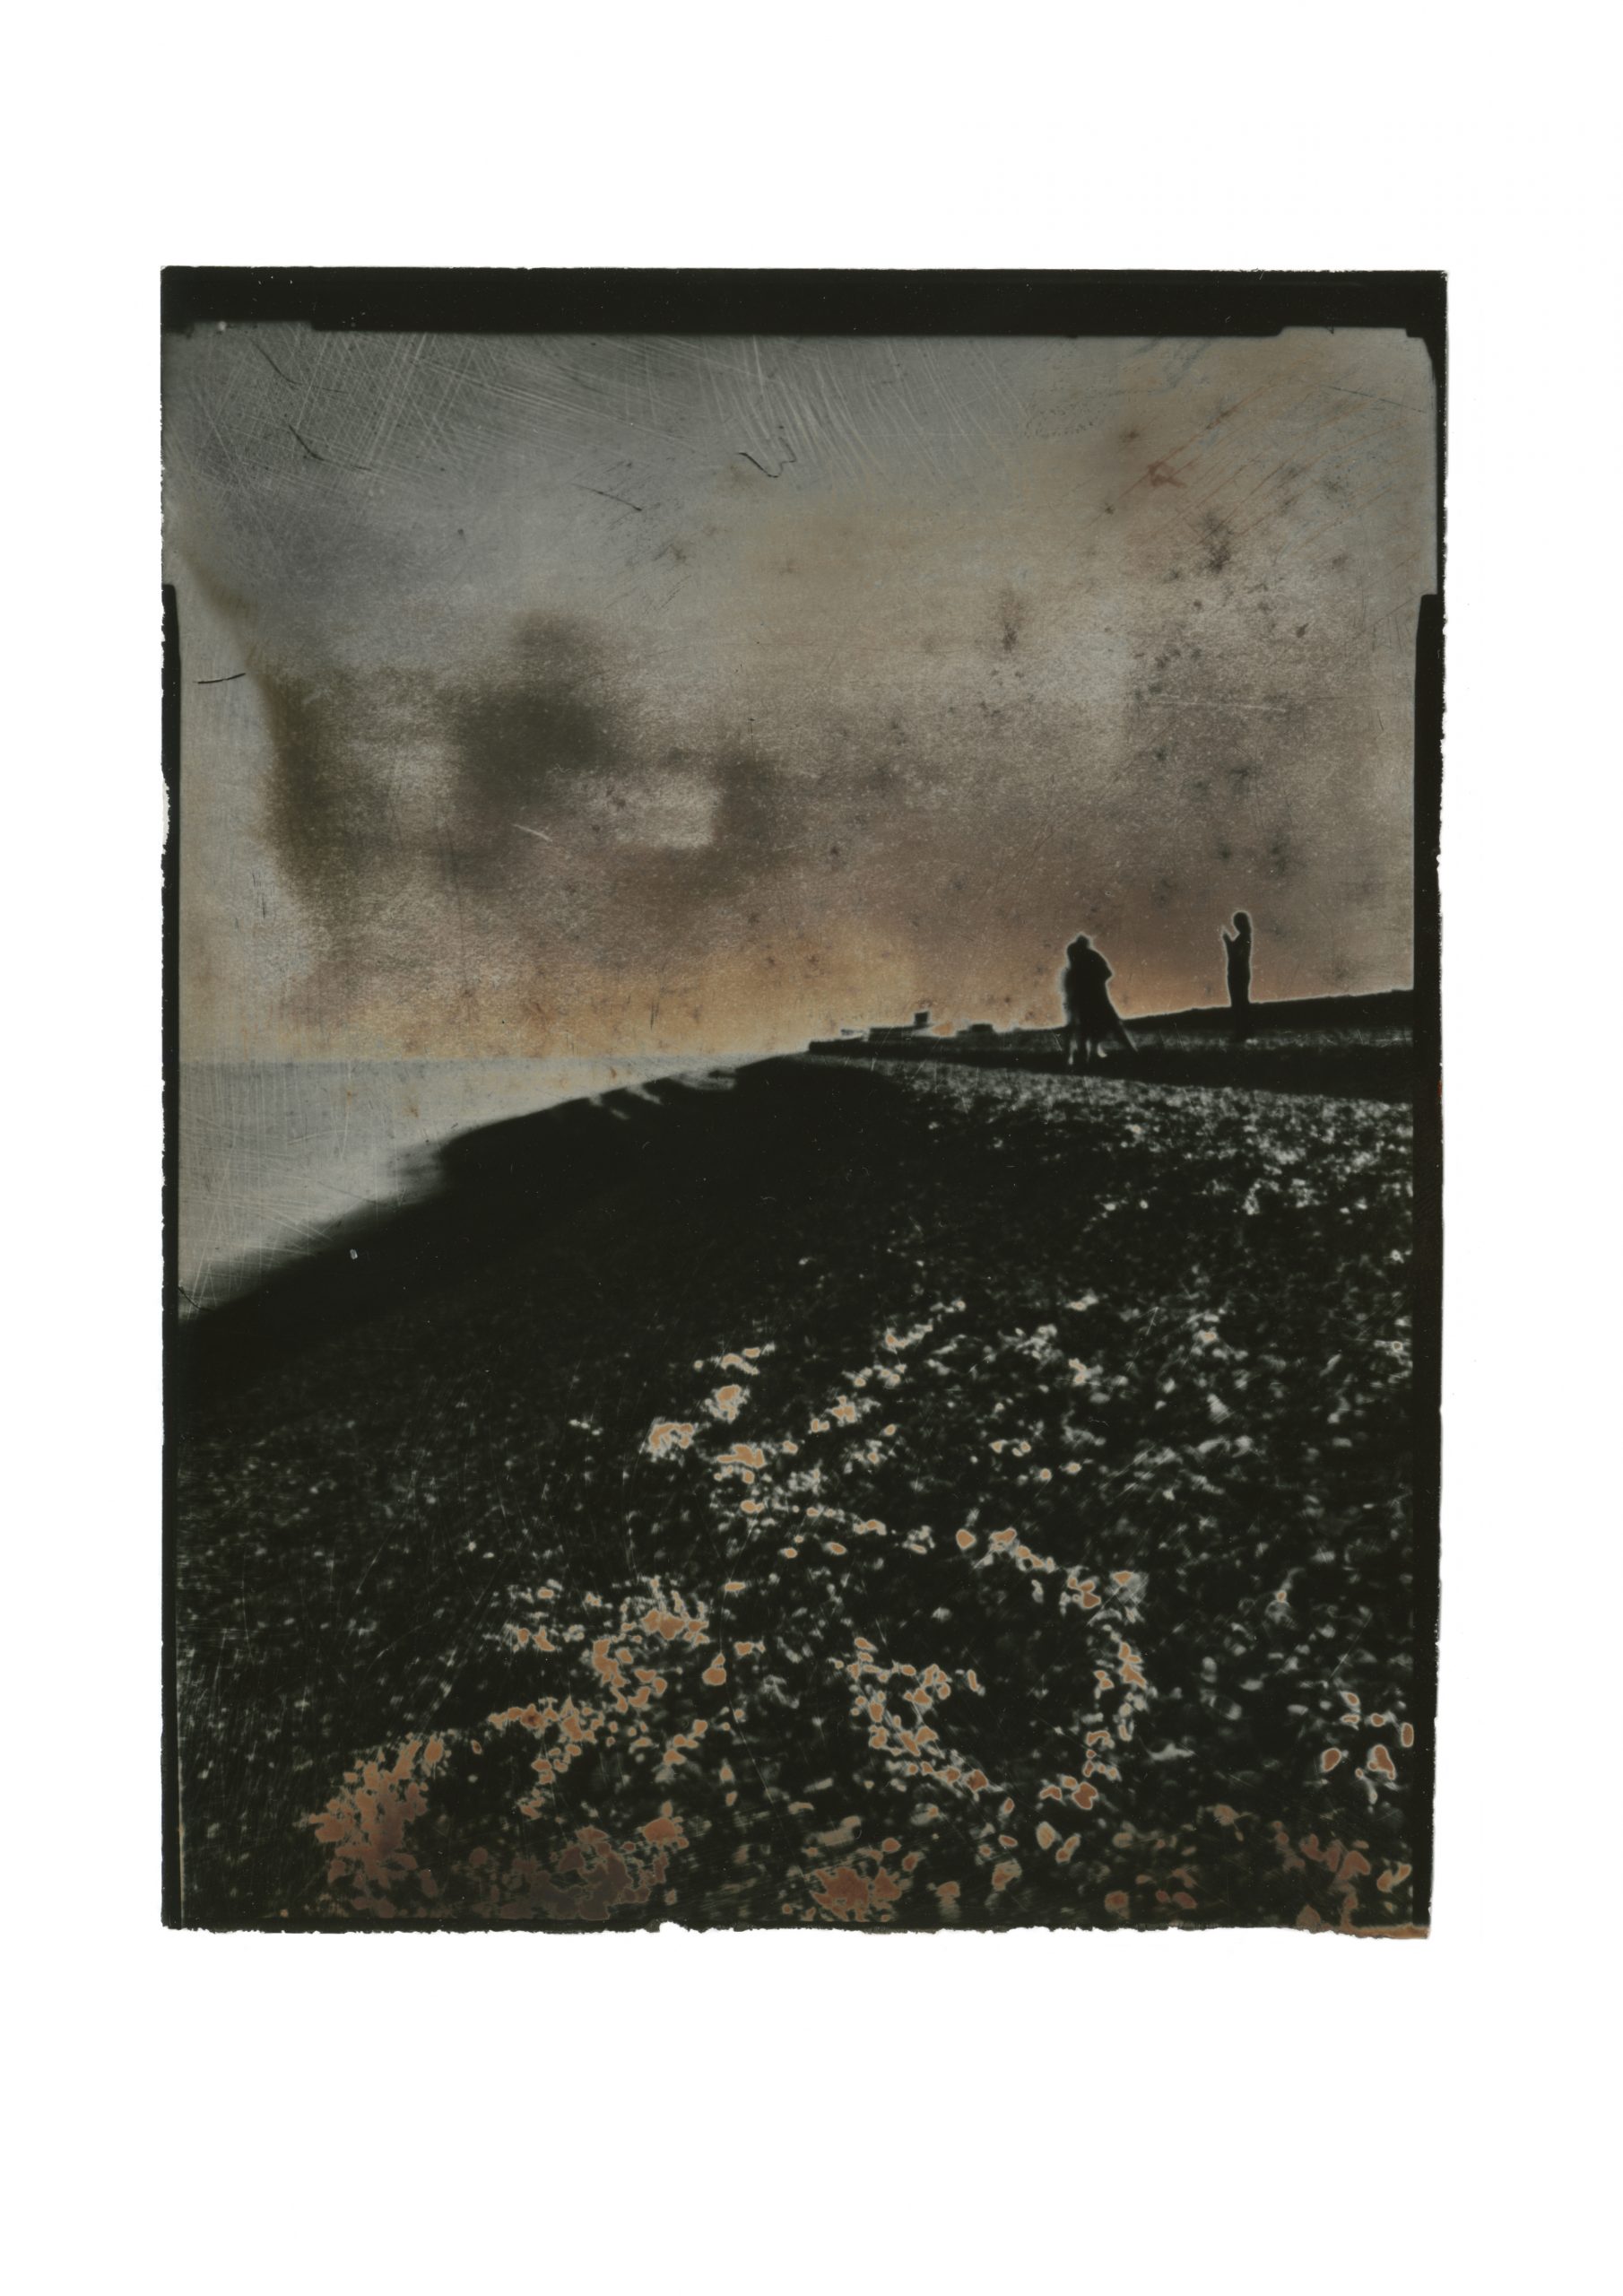 brooding contrasty image of steep bank of shingle with handprinted sky horizon line punctuated by shout of two figures